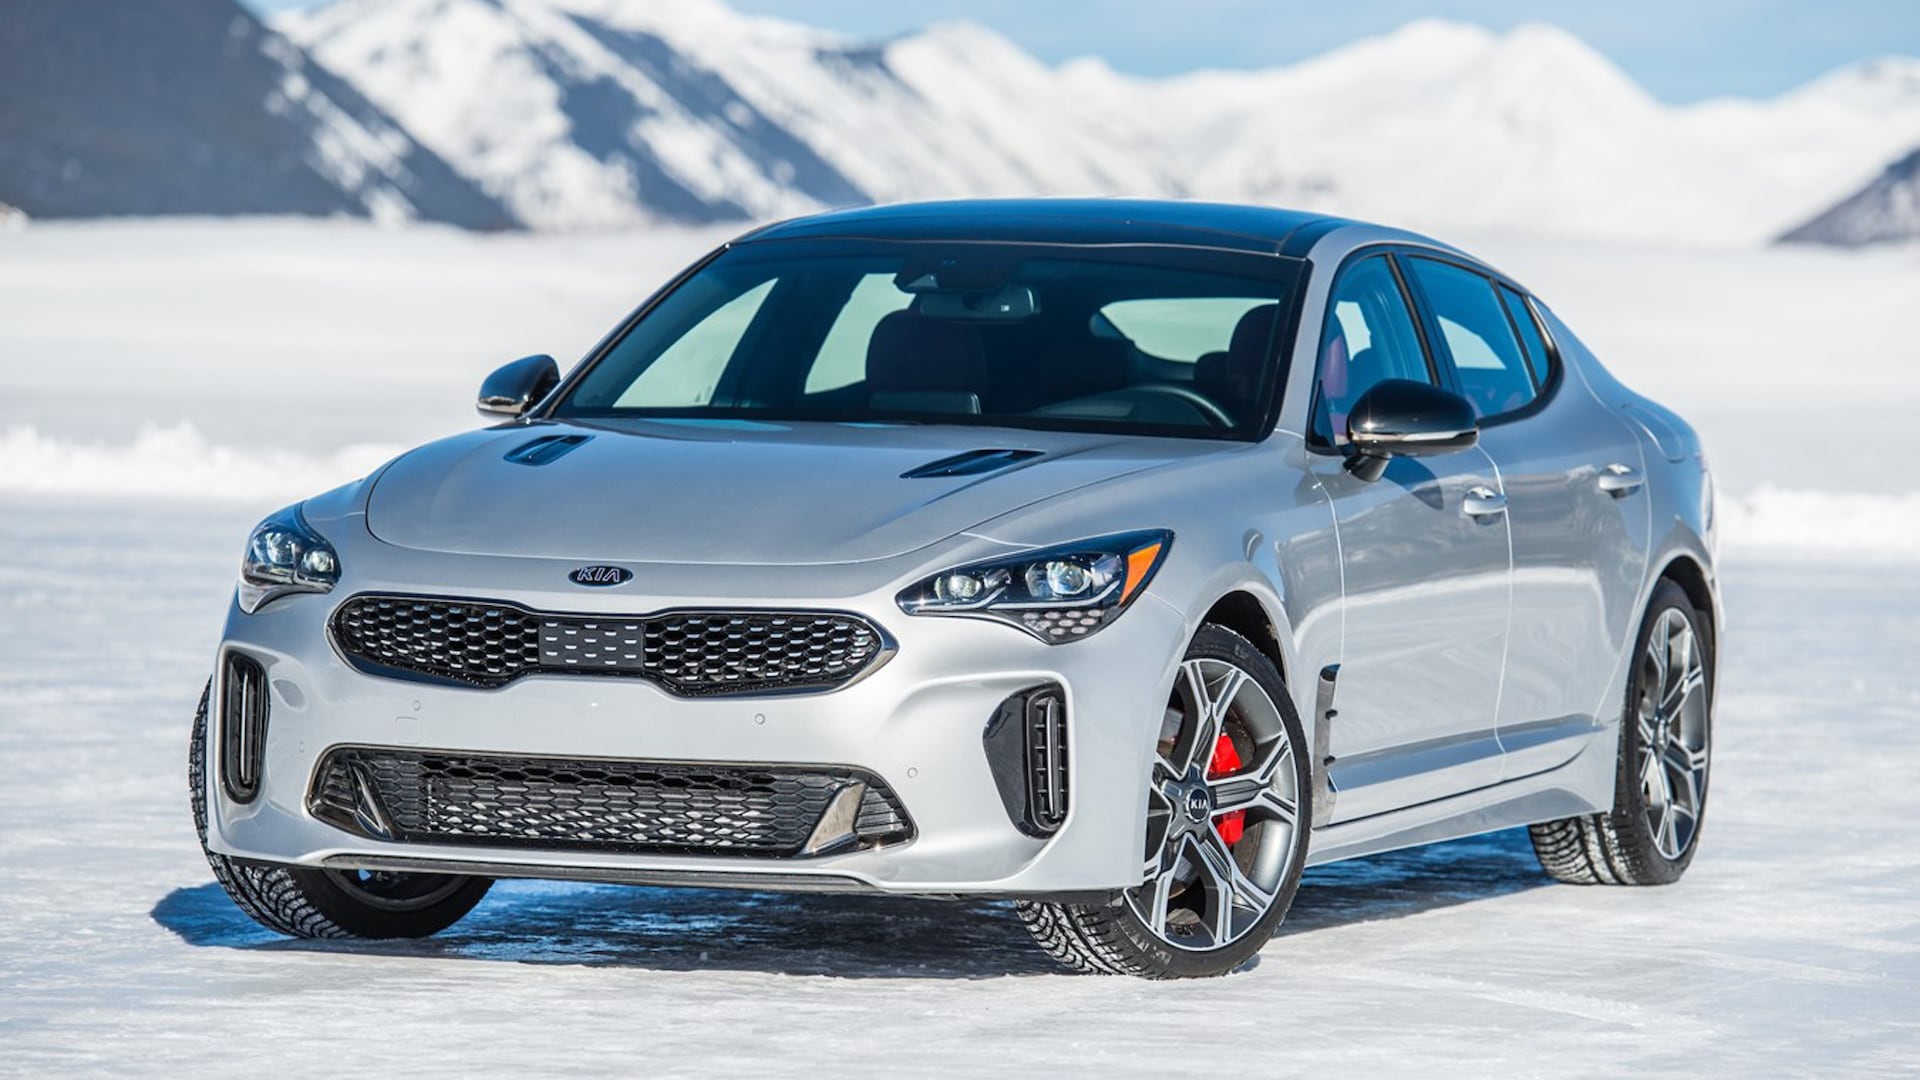 2021 Kia Stinger Prices, Reviews, and Photos - MotorTrend